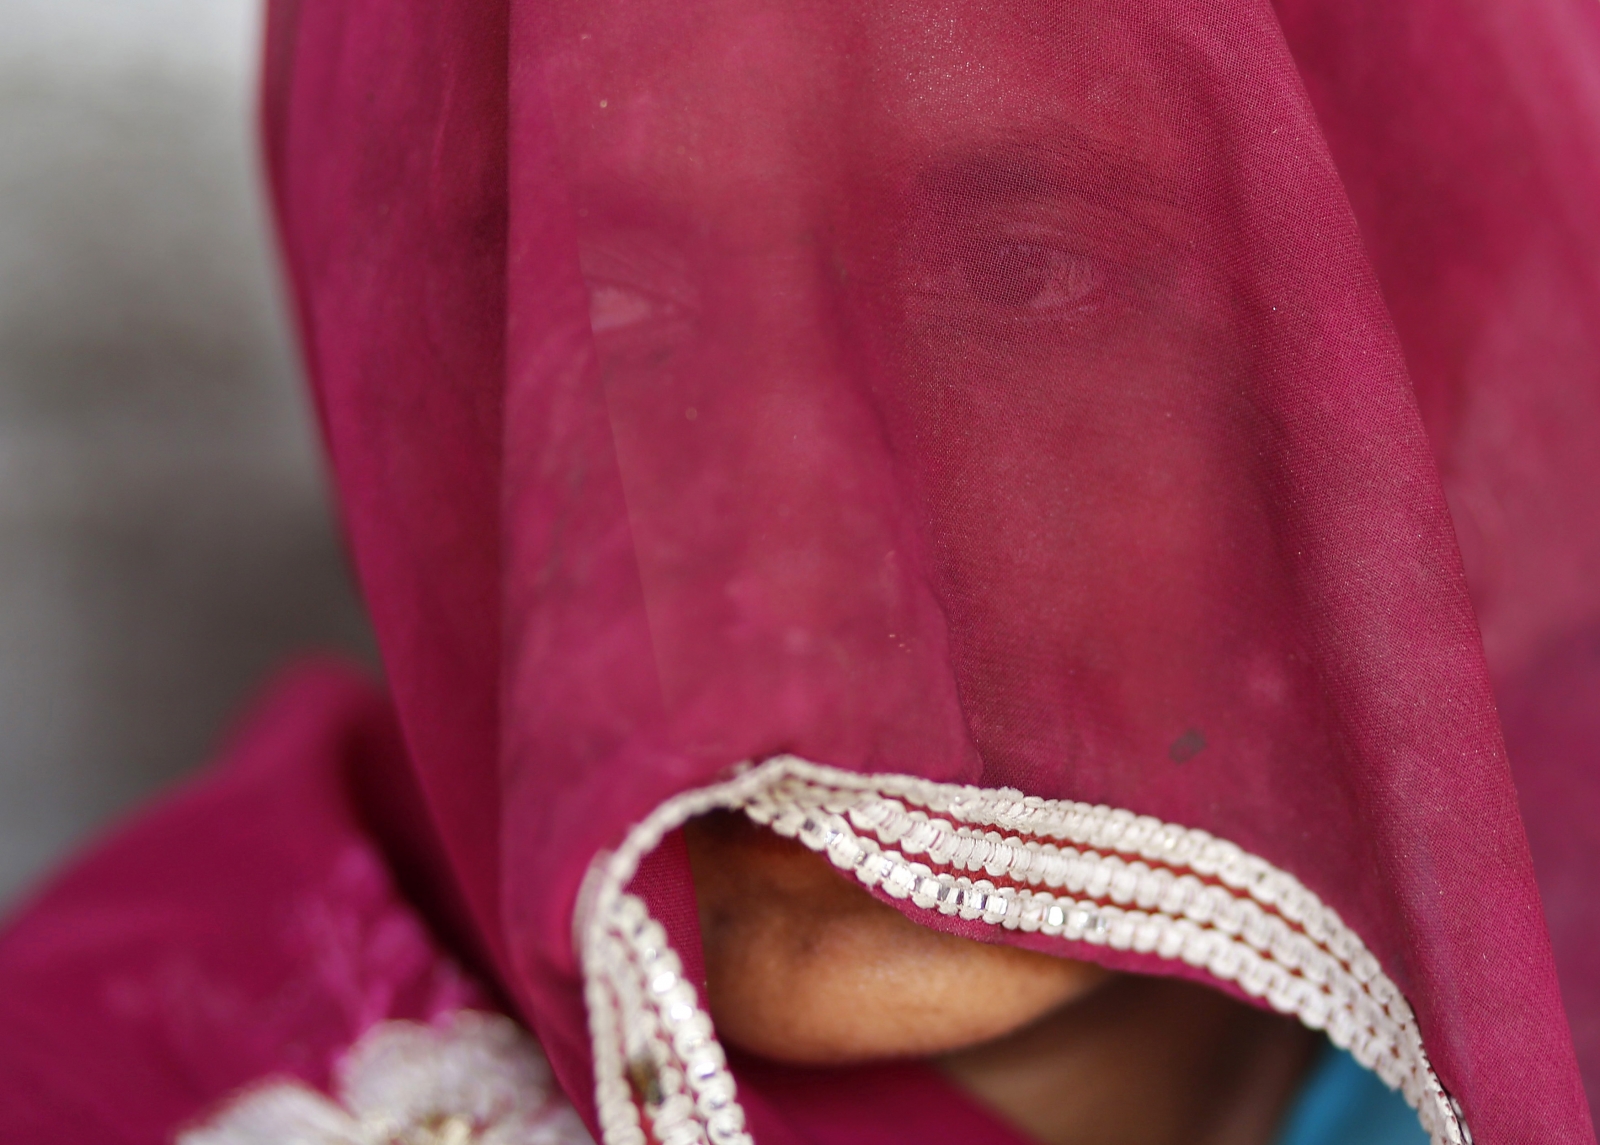 The veiled mother of one of the two teenage girls who were raped and hung in Budaun district of Uttar Pradesh, sits inside her house. The two cousins, from a low-caste community, aged 14 and 15, went missing from their village home after going out to the toilet. The next morning, villagers found their bodies hanging from a mango tree in a nearby orchard.